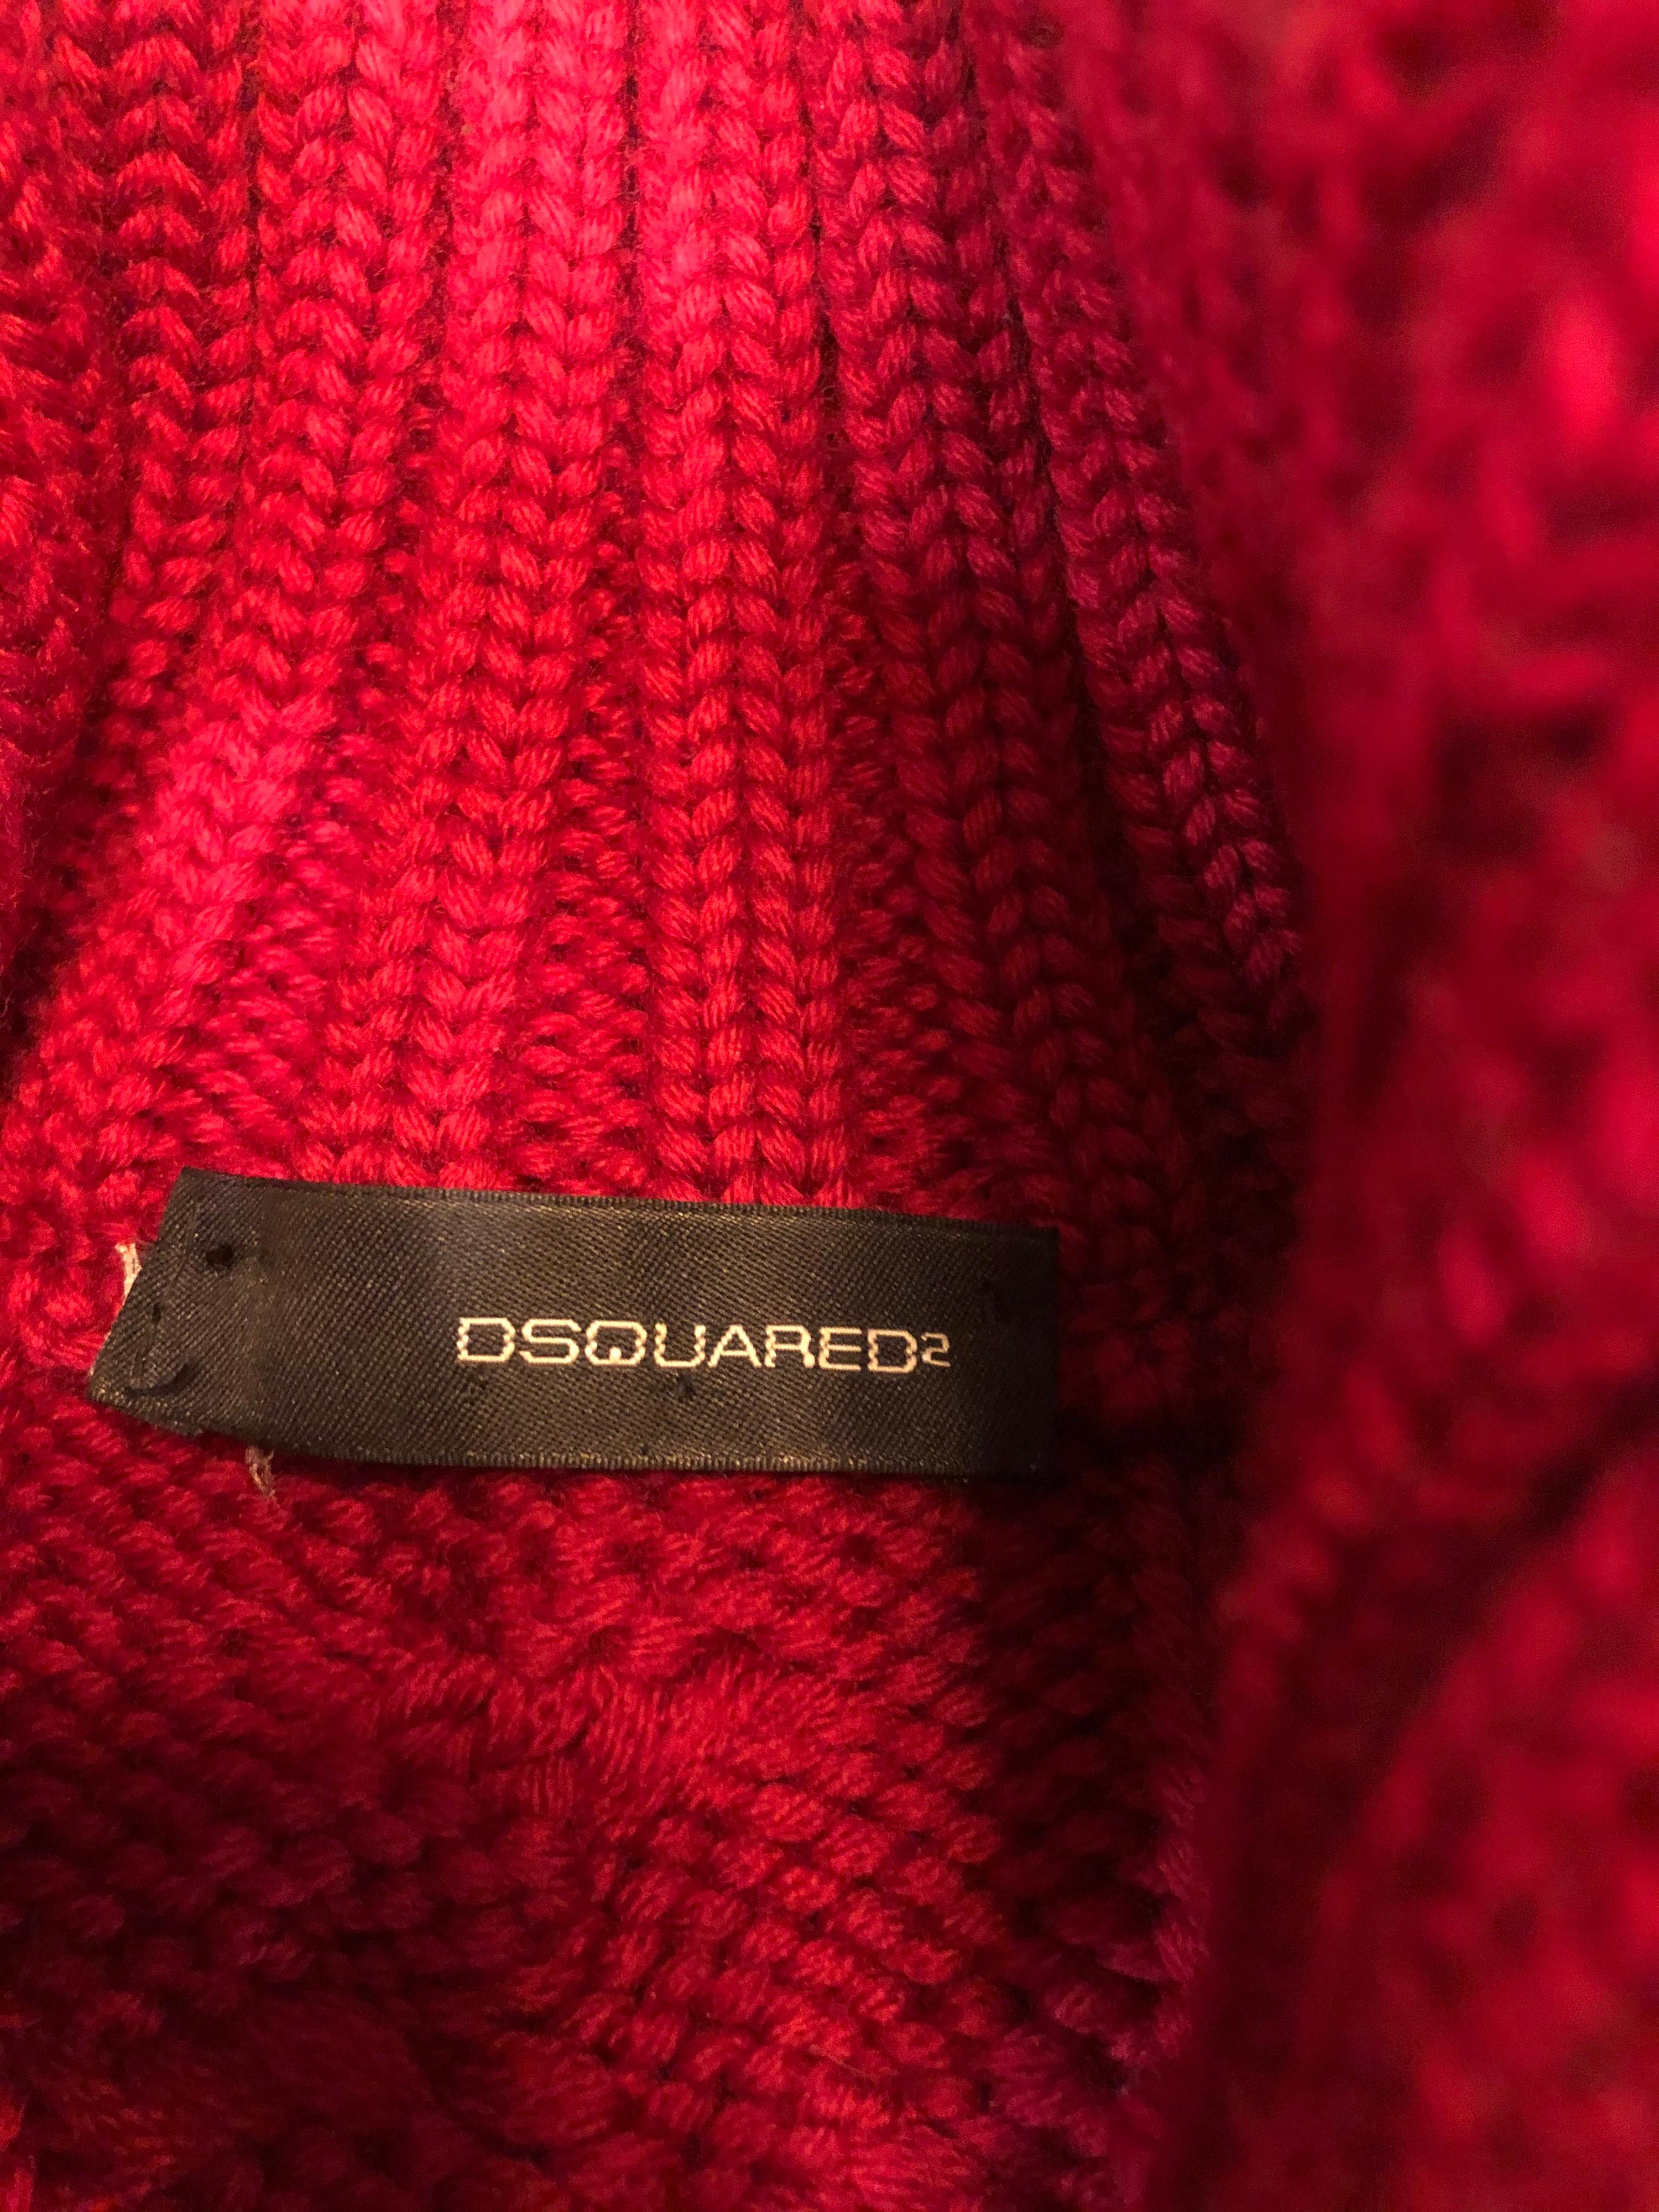 DSquared2 Early 2000s Lipstick Red Wool Sleeveless Cardigan Sweater Vest Top For Sale 8